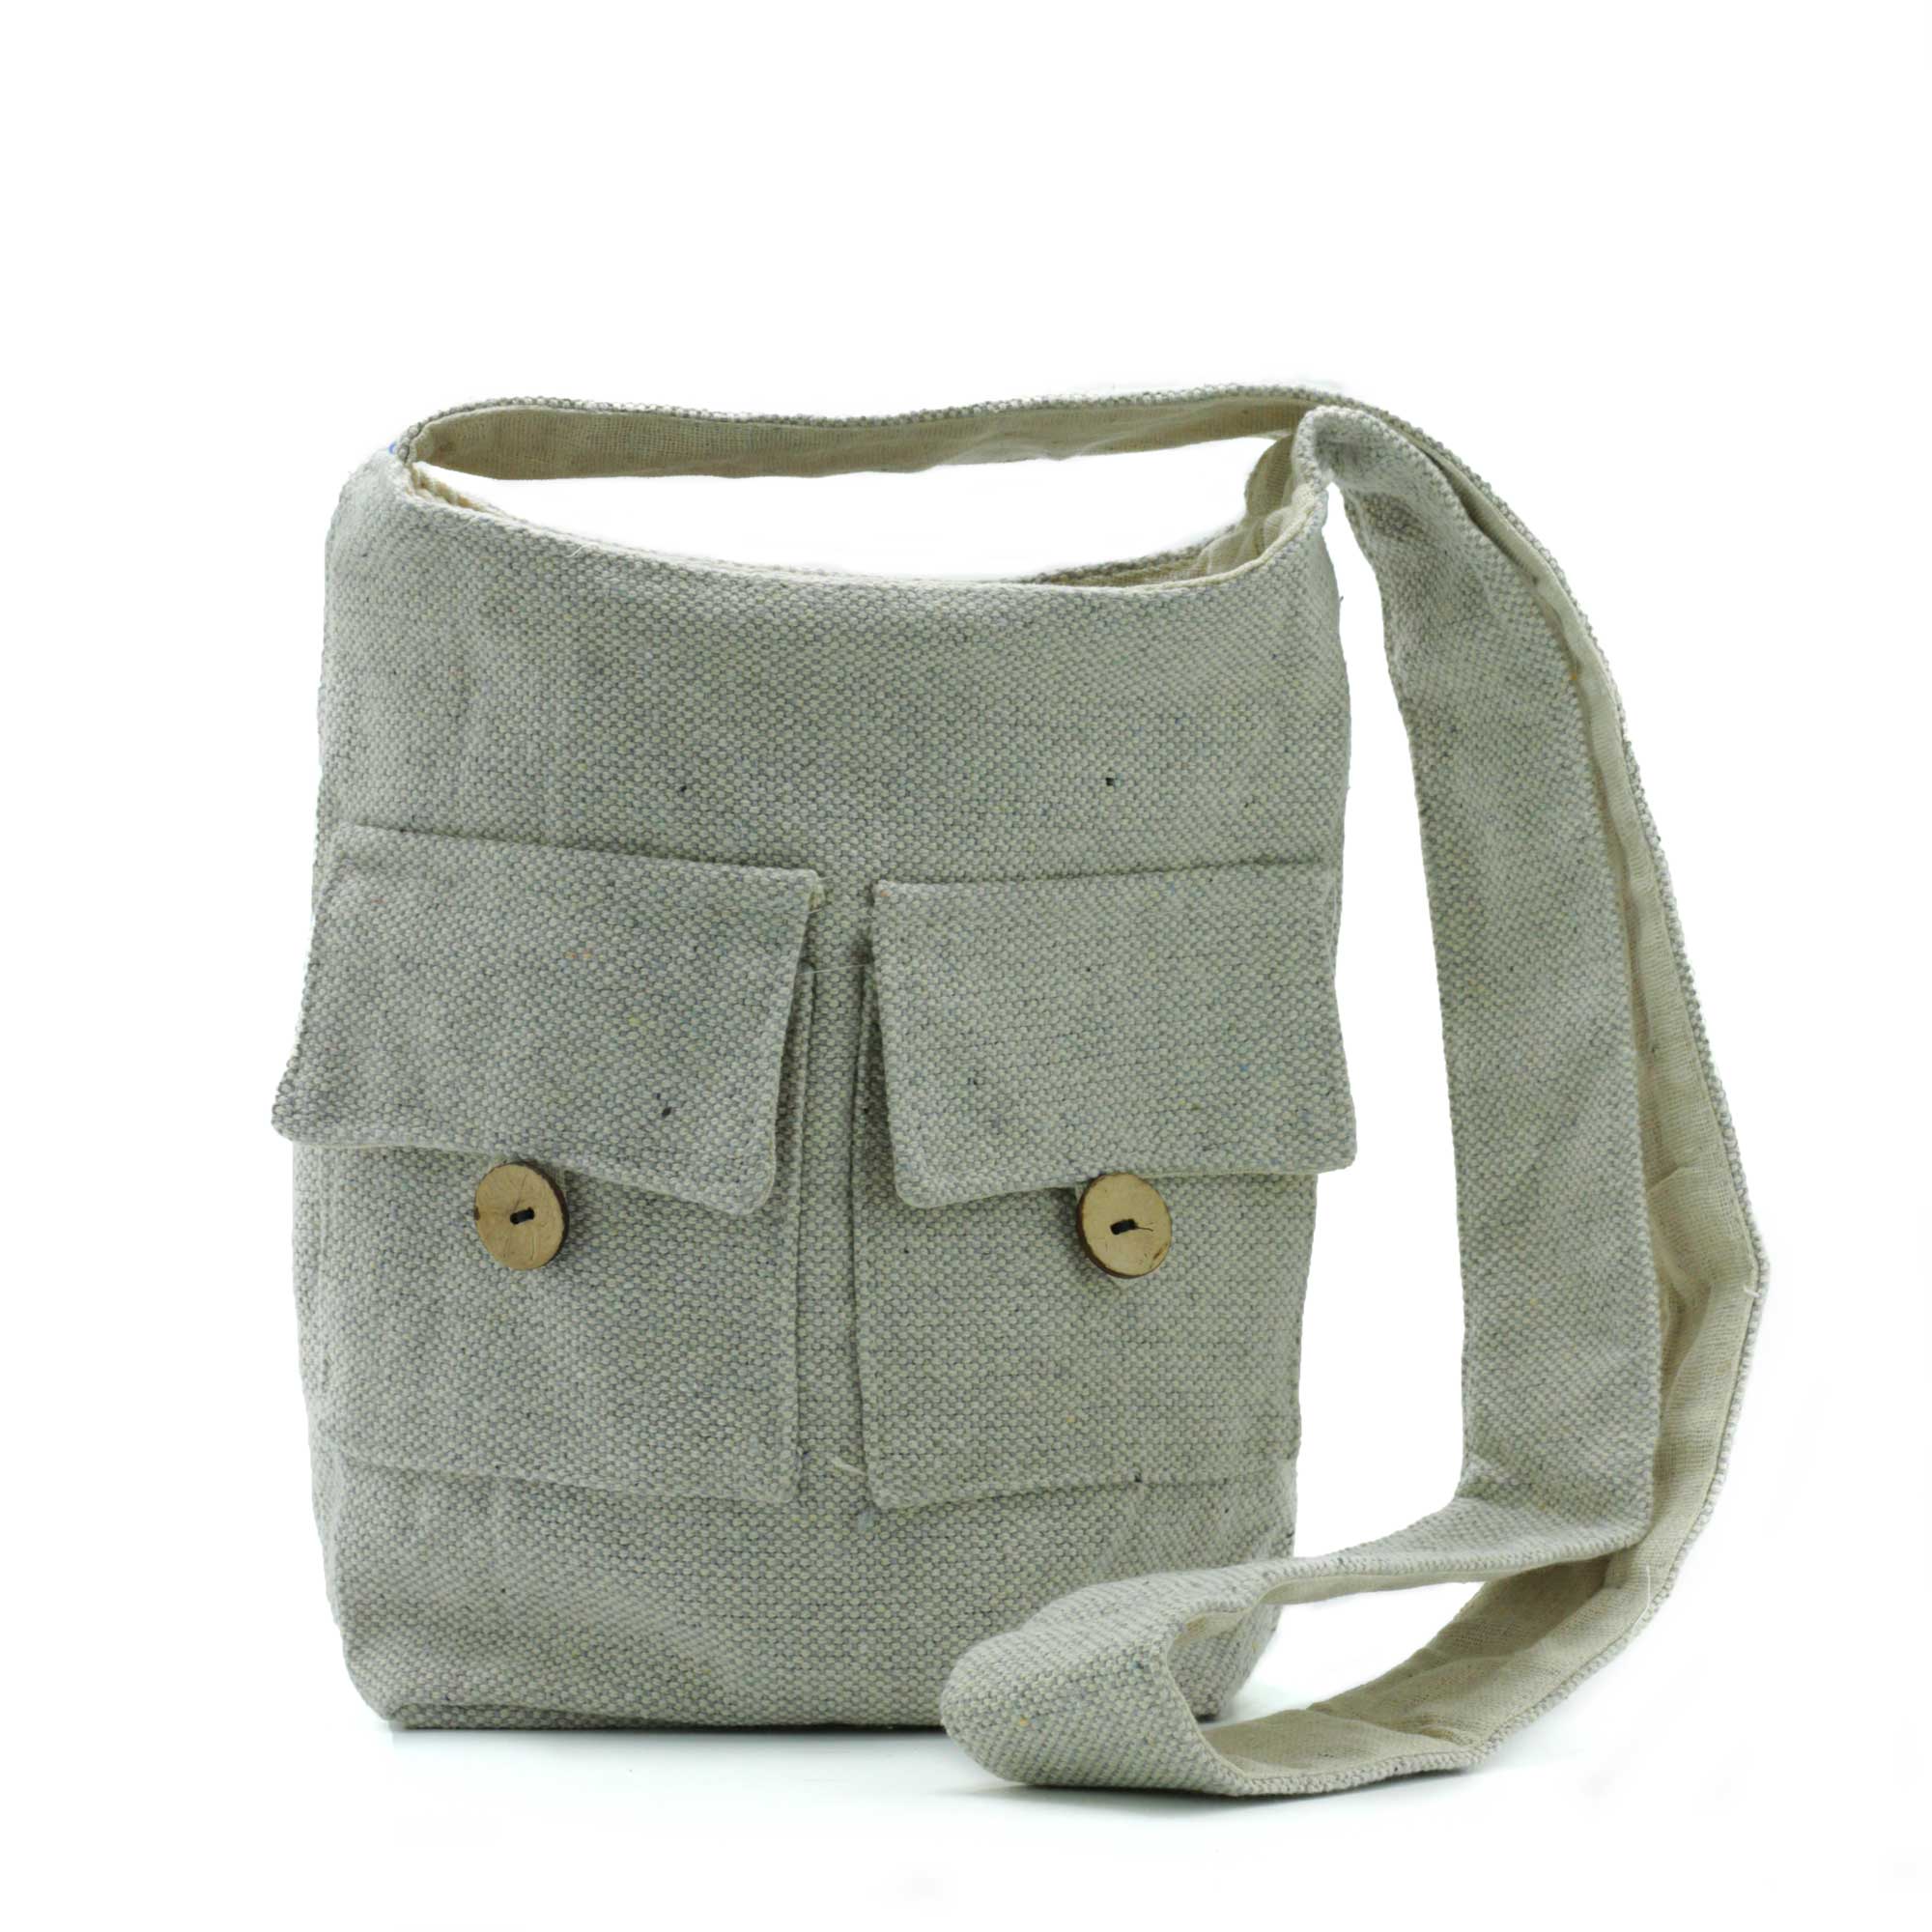 View Natural Tones Two Pocket Bags Stone Medium information